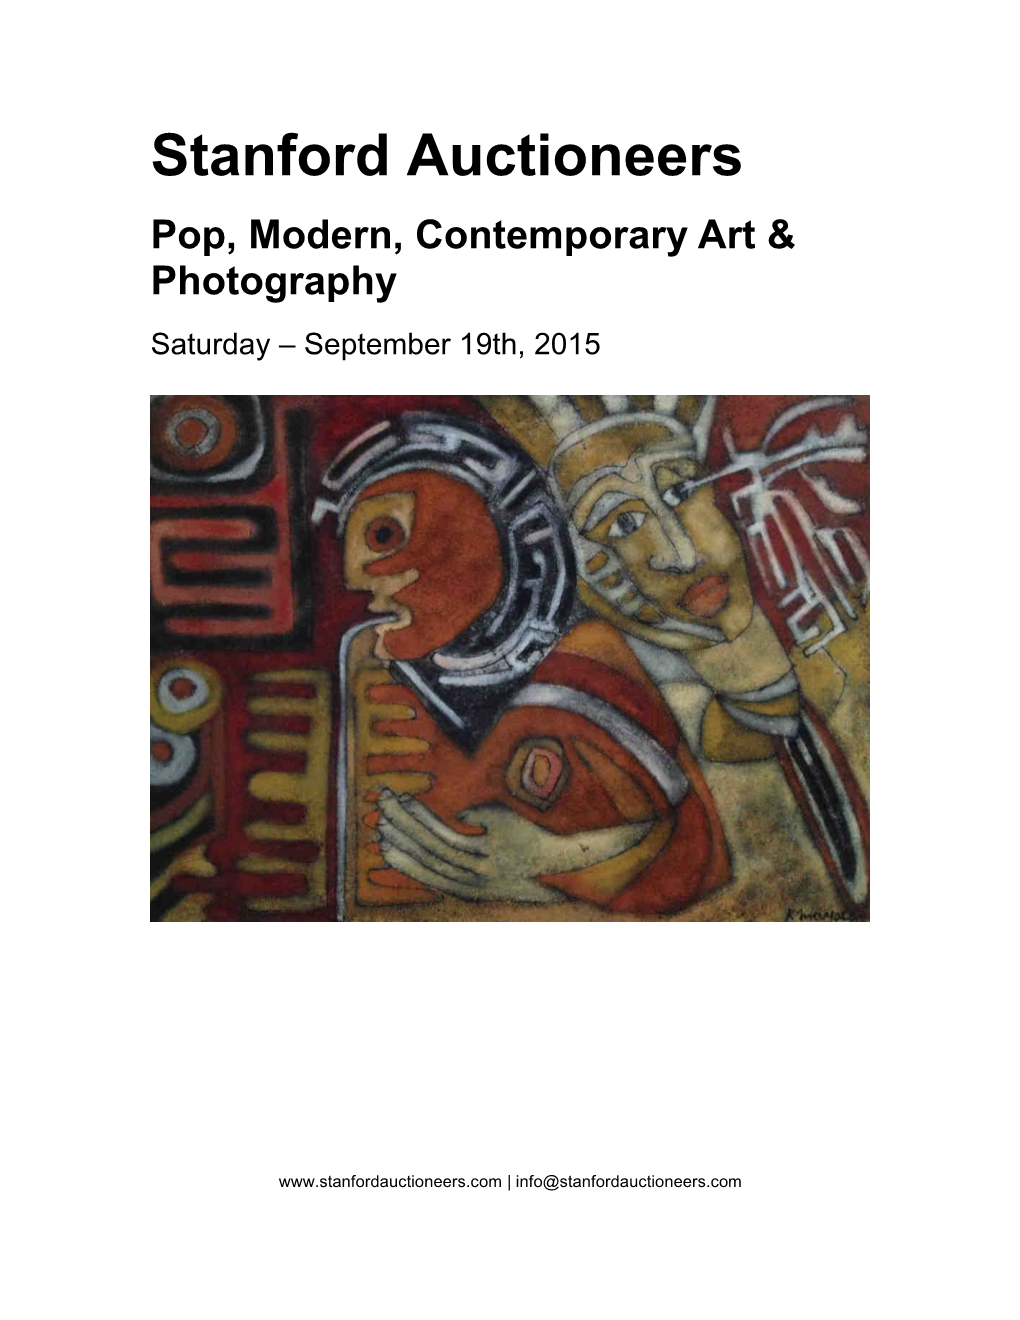 Stanford Auctioneers Pop, Modern, Contemporary Art & Photography